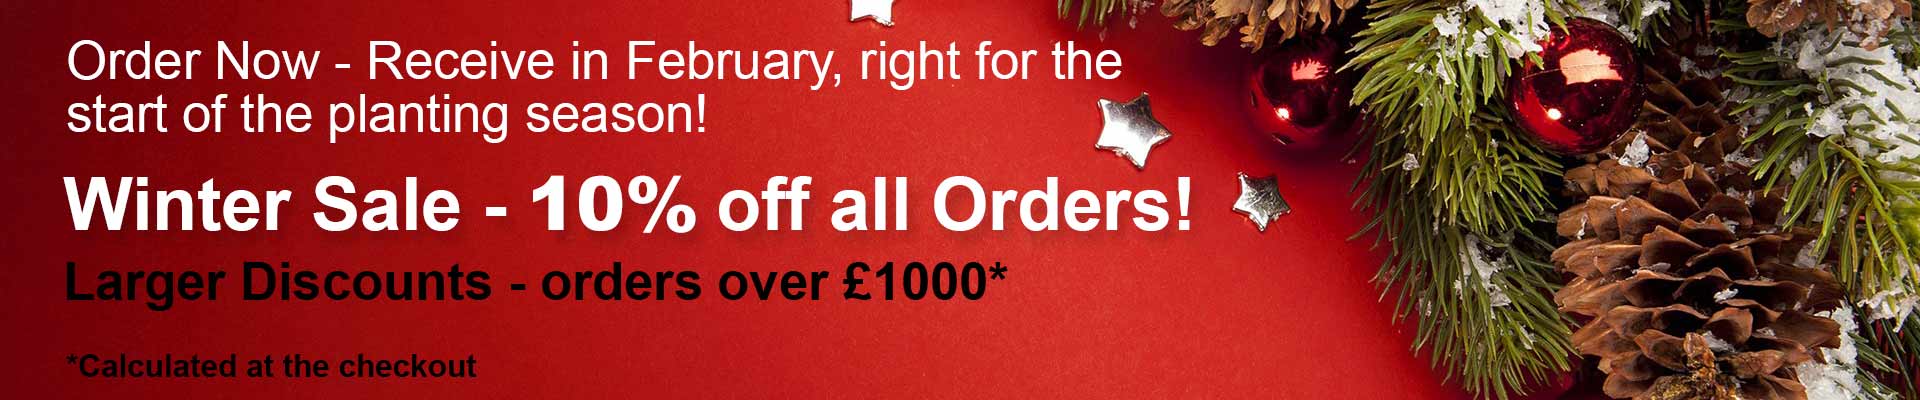 Order Now - Receive in February, right for the start of the planting season! Winter Sale - 10% off all Orders! Larger Discounts - order over £1000